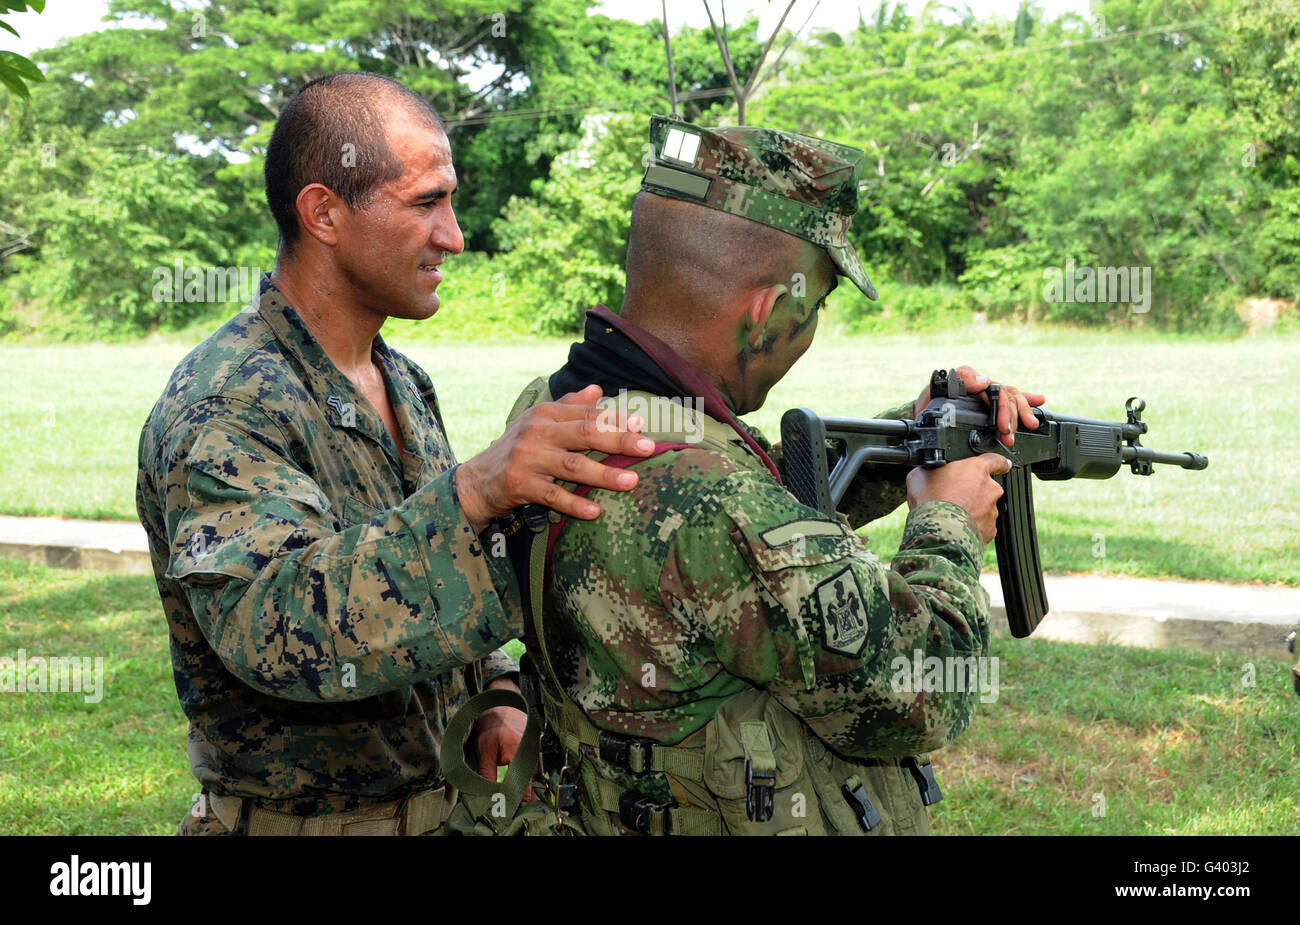 U.S. Marine coaches load and reload procedures to a Colombian marine. Stock Photo